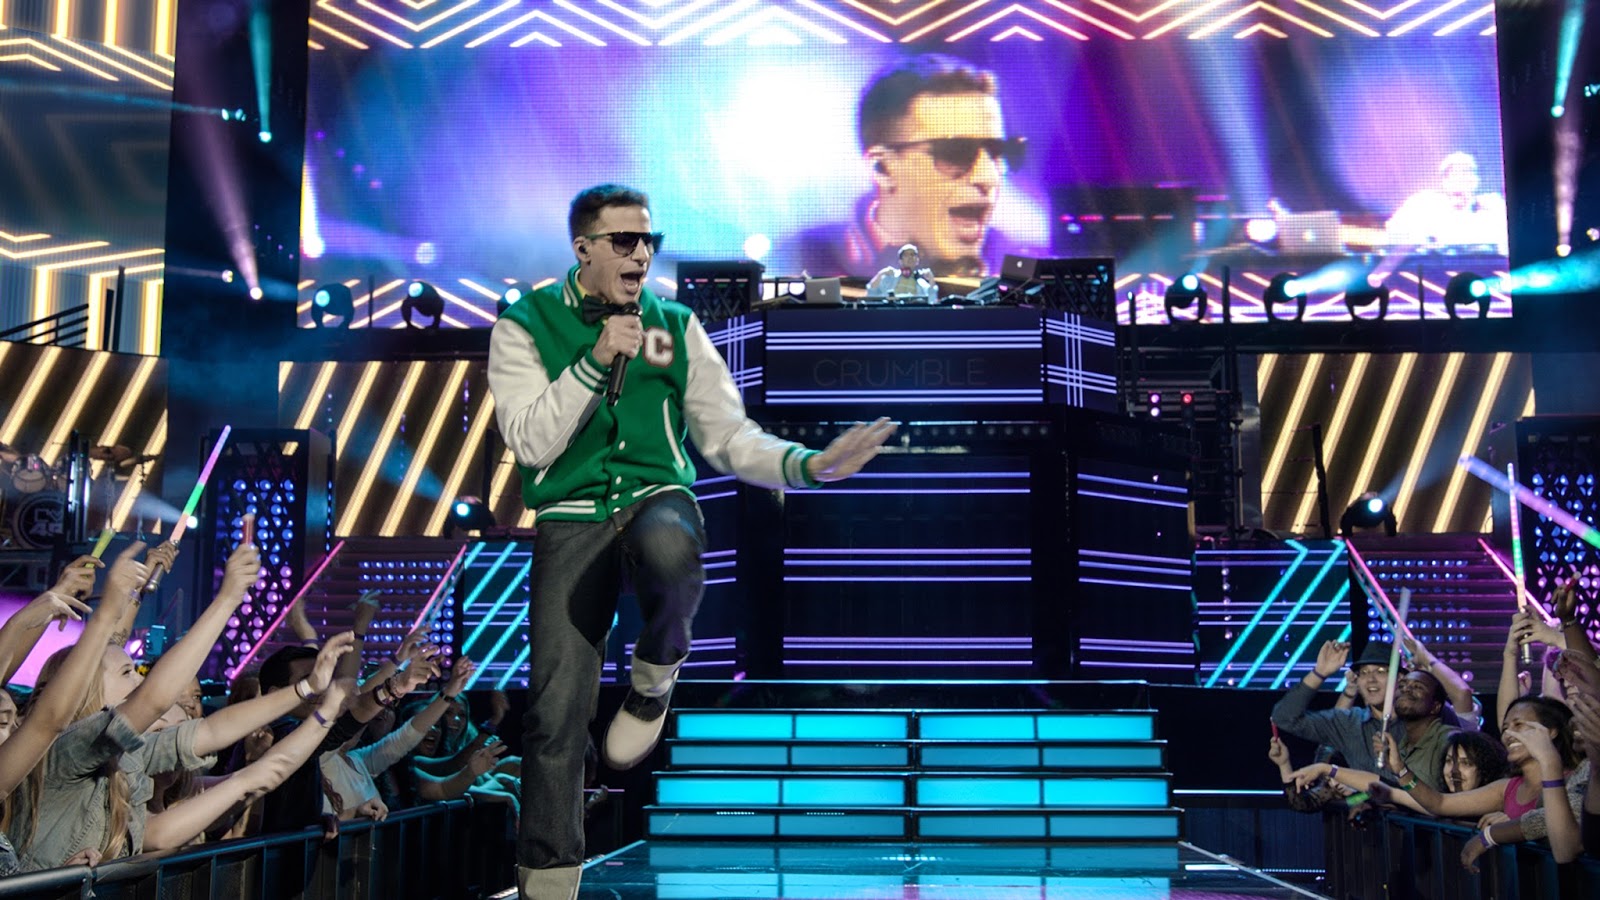 MOVIES: Popstar: Never Stop Never Stopping - Review